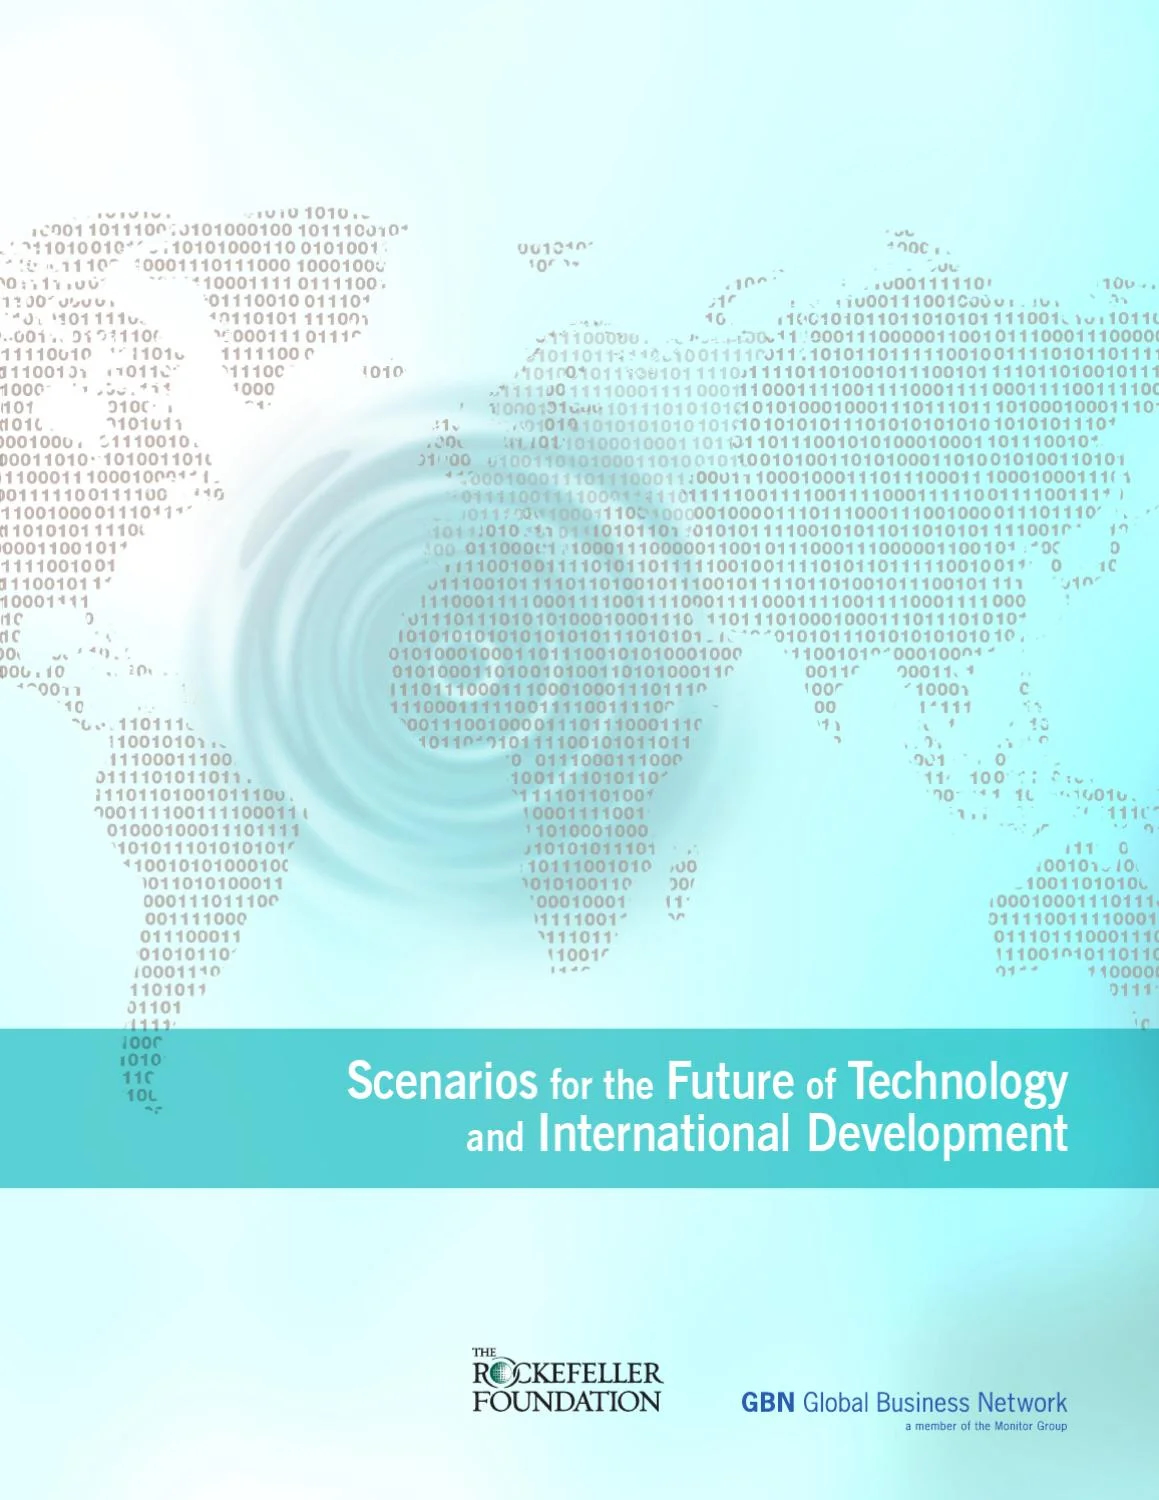 scenarios_for_the_future_of_technology_and_international_development_(cover).jpg